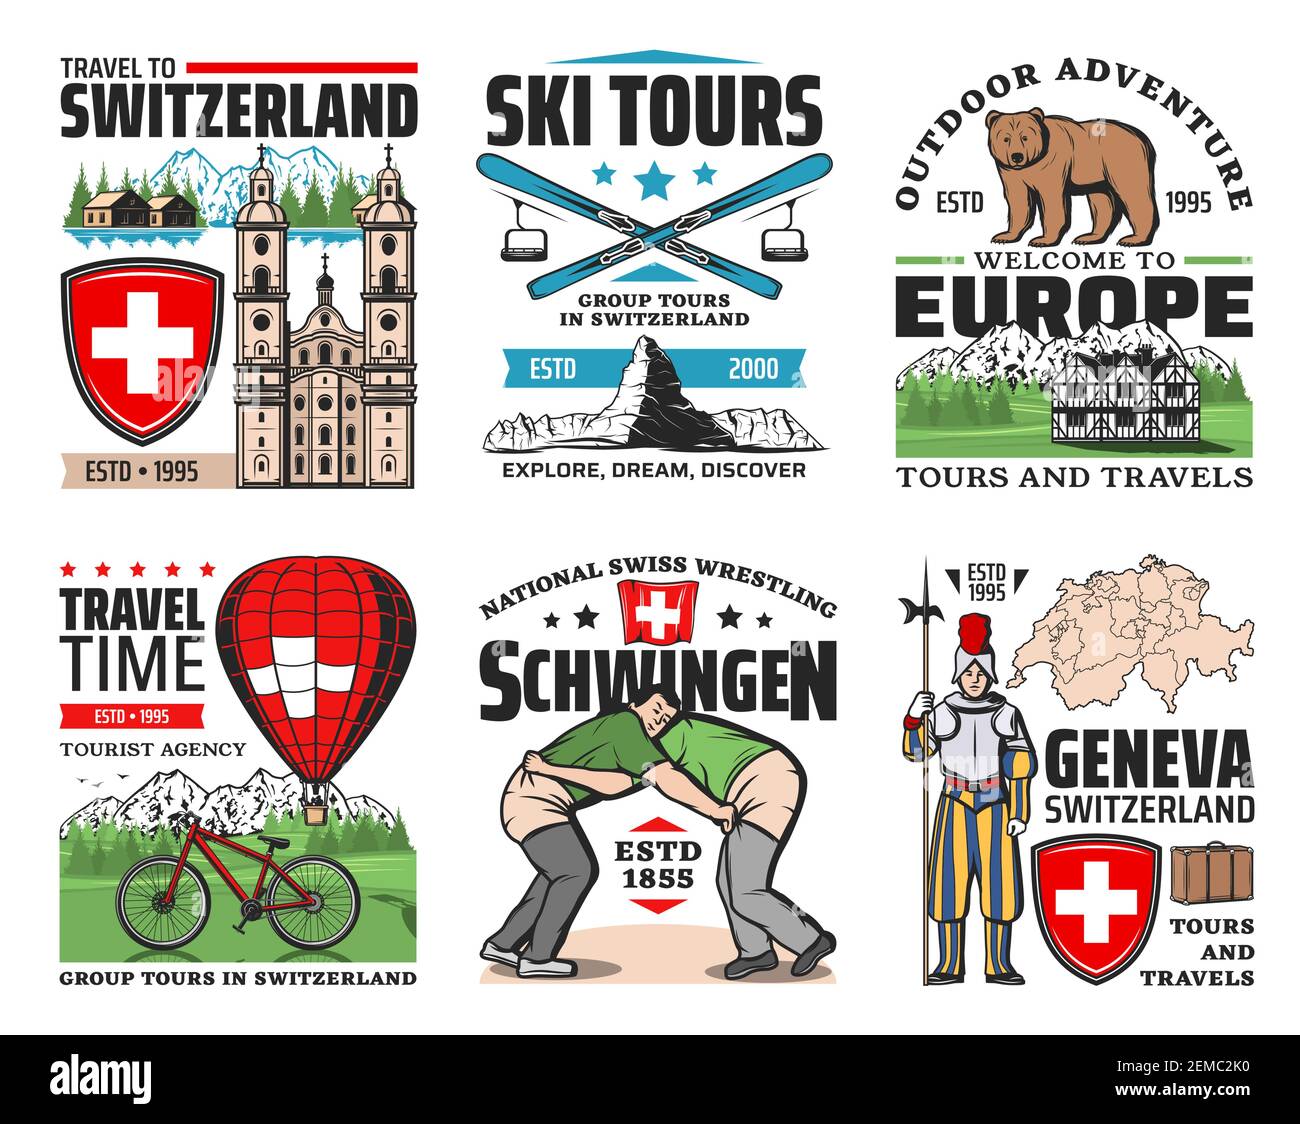 Switzerland travel, tours, landmarks and attractions sightseeing trip icons. Switzerland map, castles and temples architecture, Schwingen Swiss wrestl Stock Vector